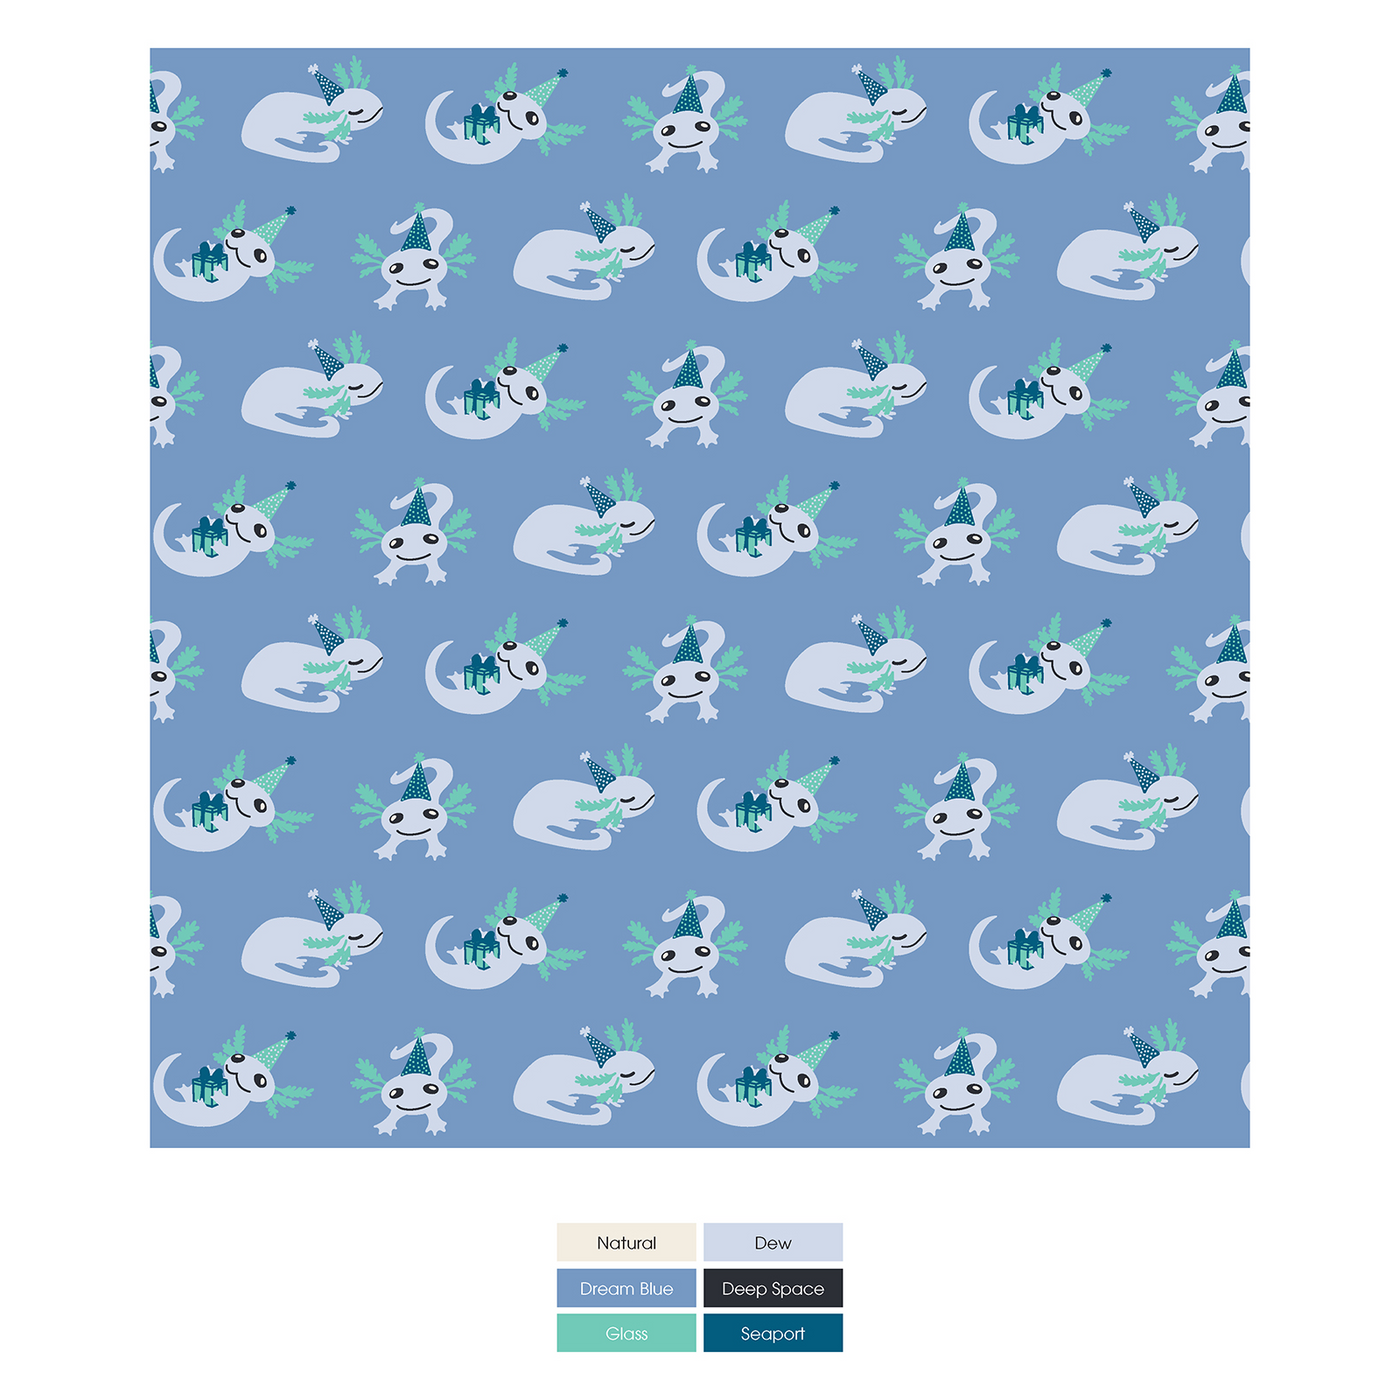 Kickee Pants Footie With Snaps: Dream Blue Axolotl Party